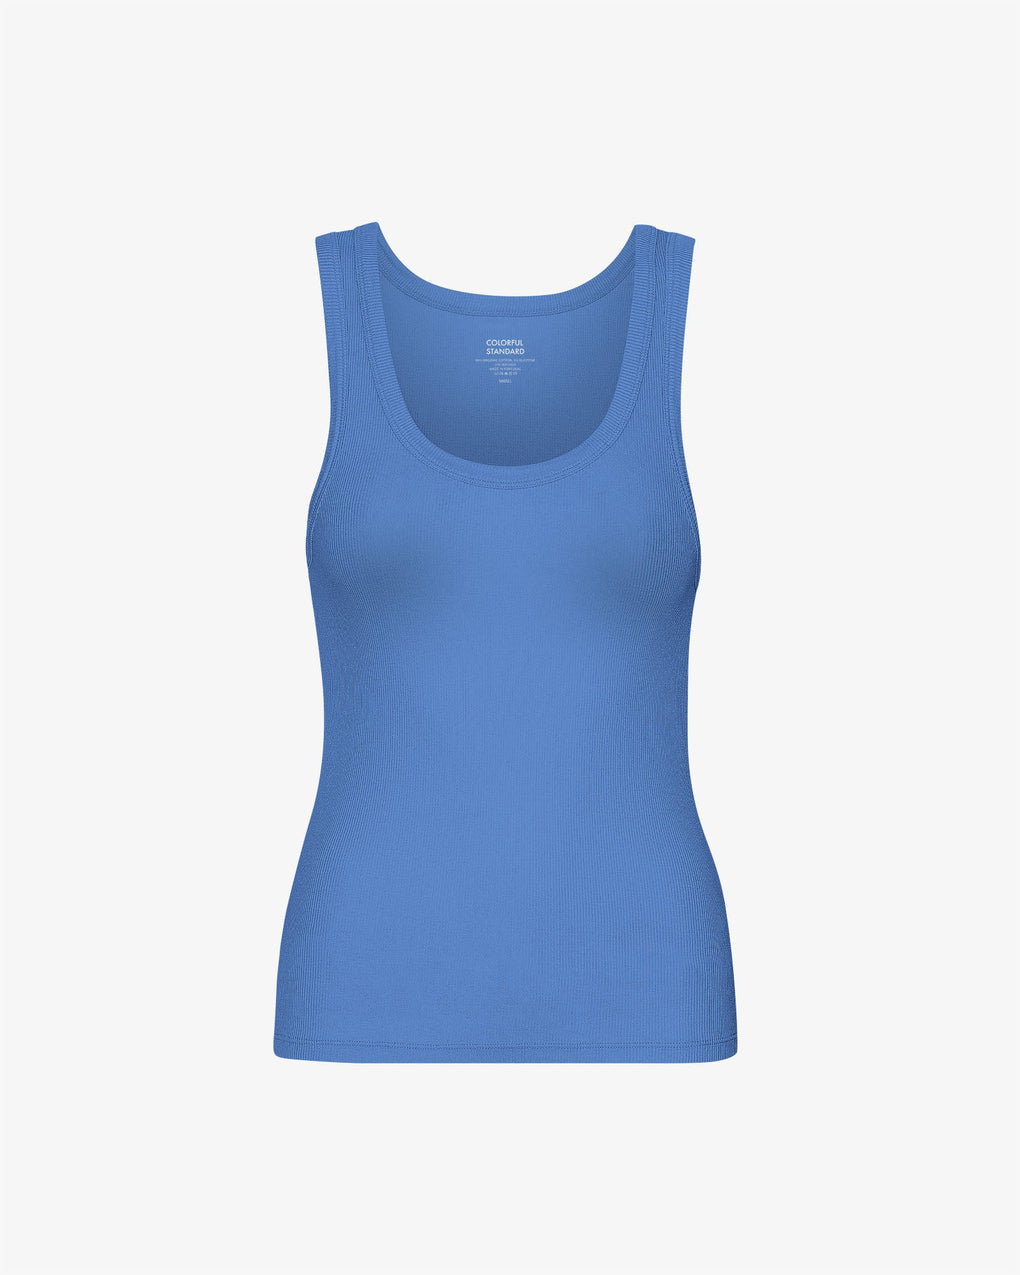 TANK TOP BY COLORFUL STANDARD